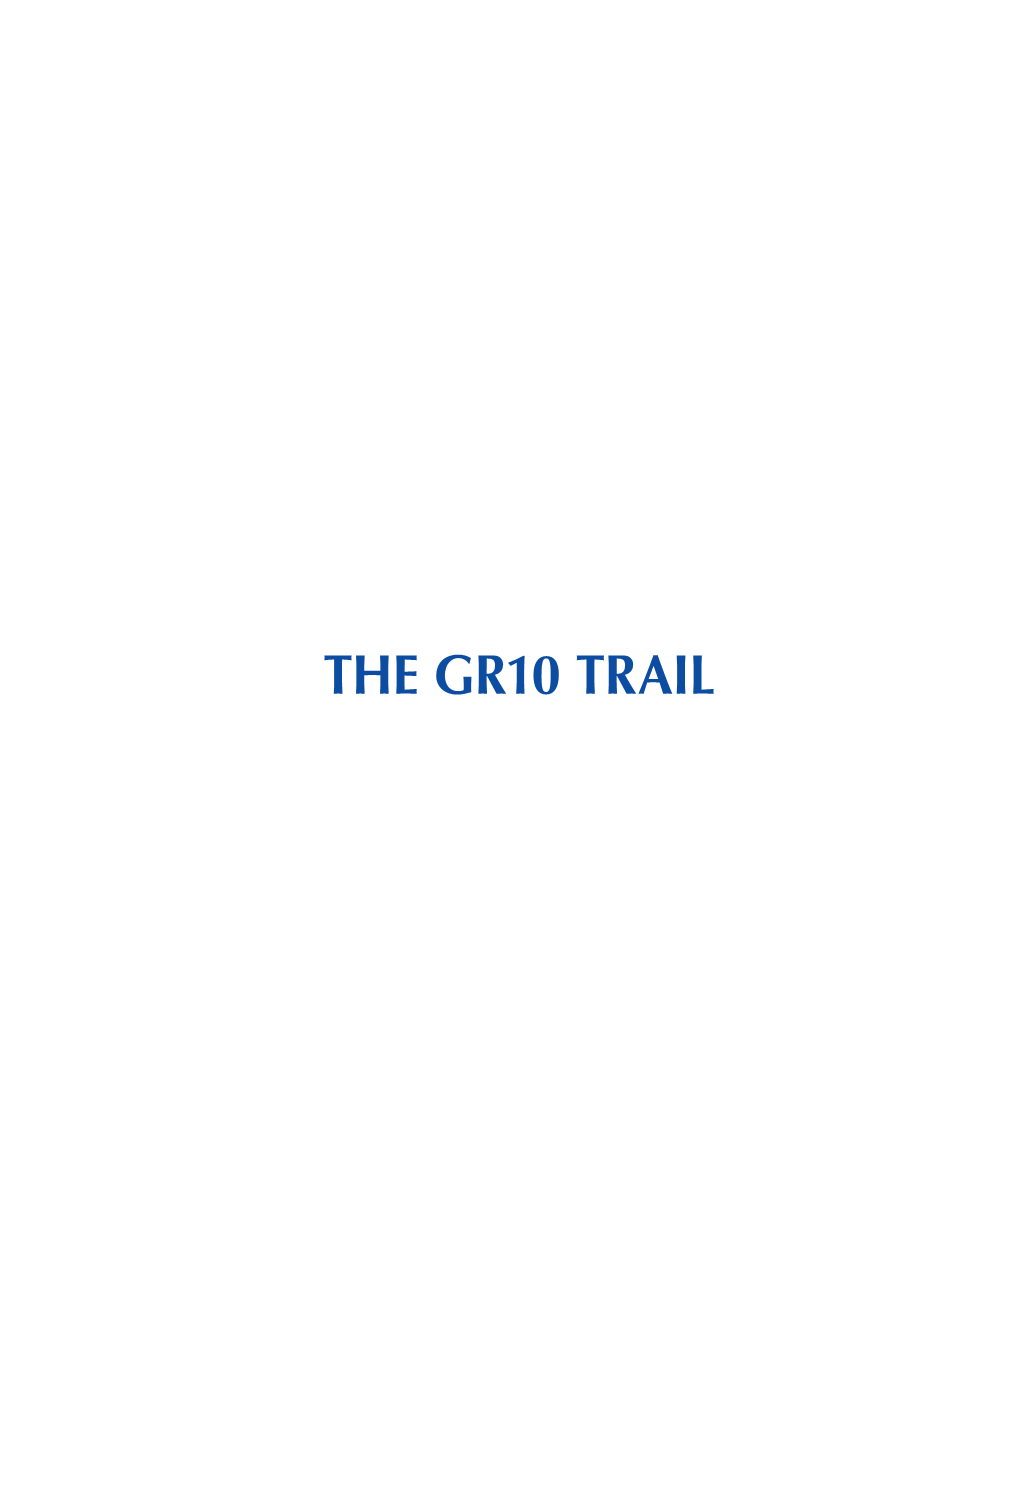 The Gr10 Trail